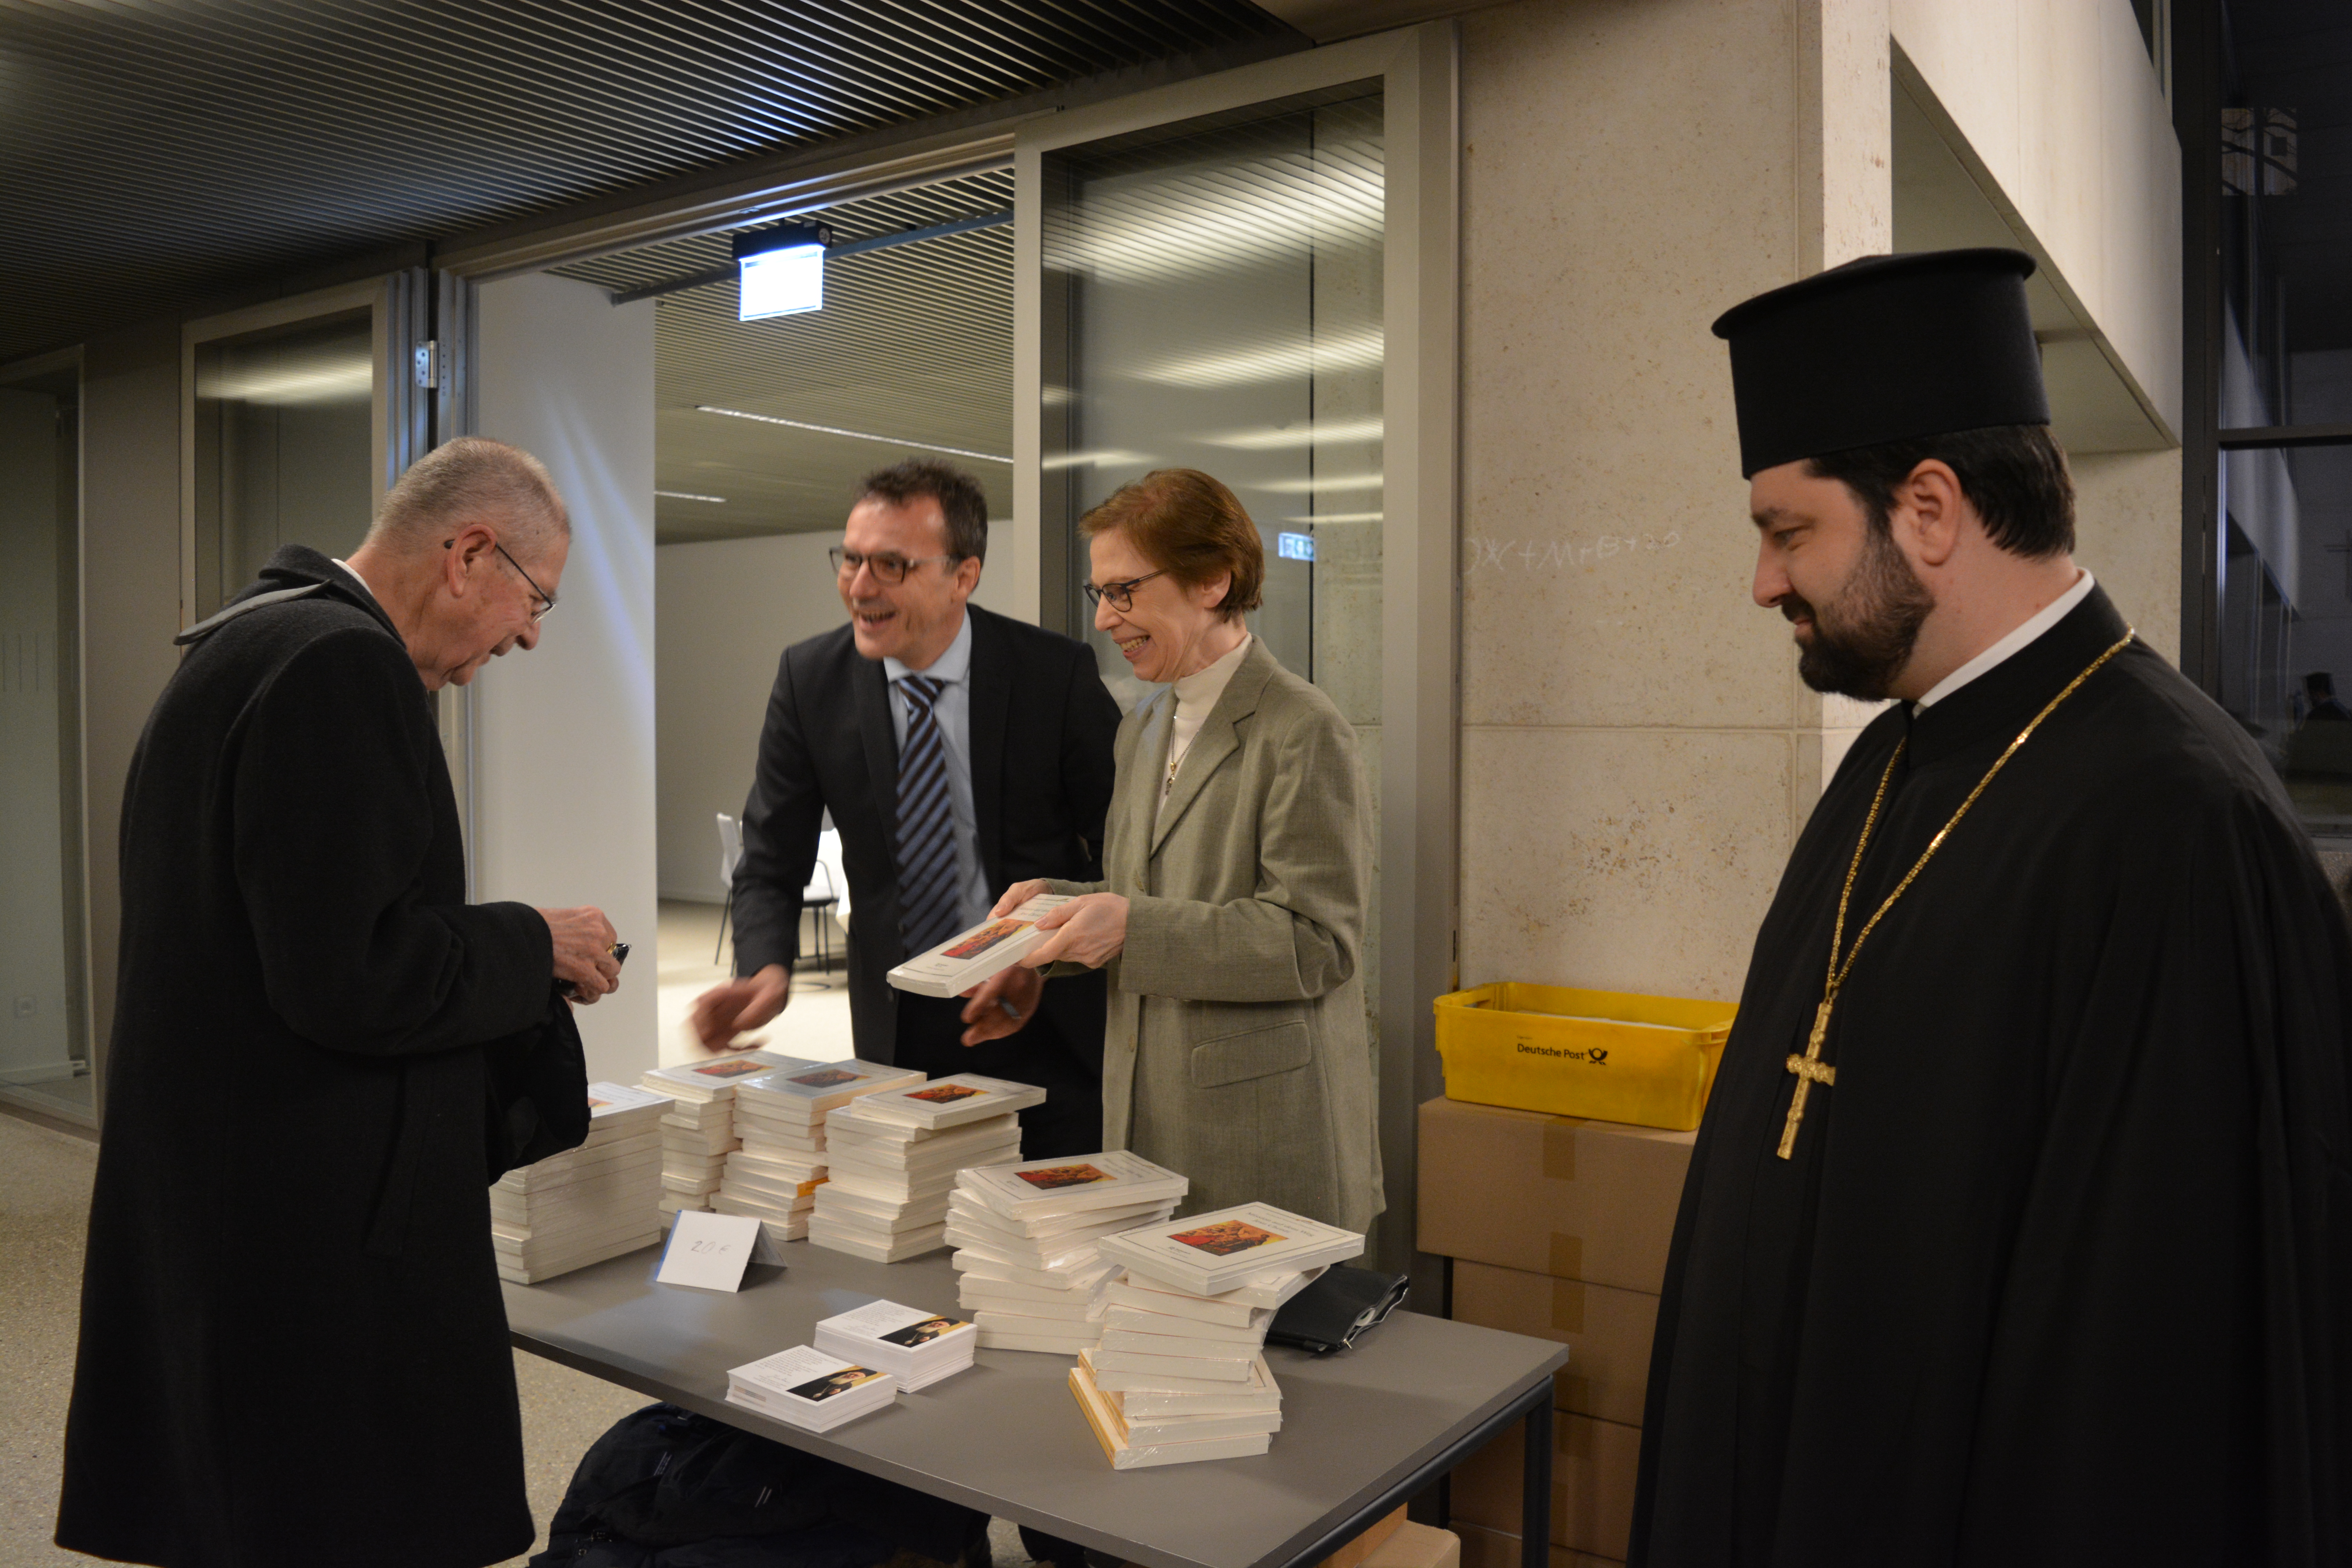 Dr. Bernward Kröger from the publishing house Aschendorf and Prof. Barbara Hallensleben, selling the book of the Archbishop